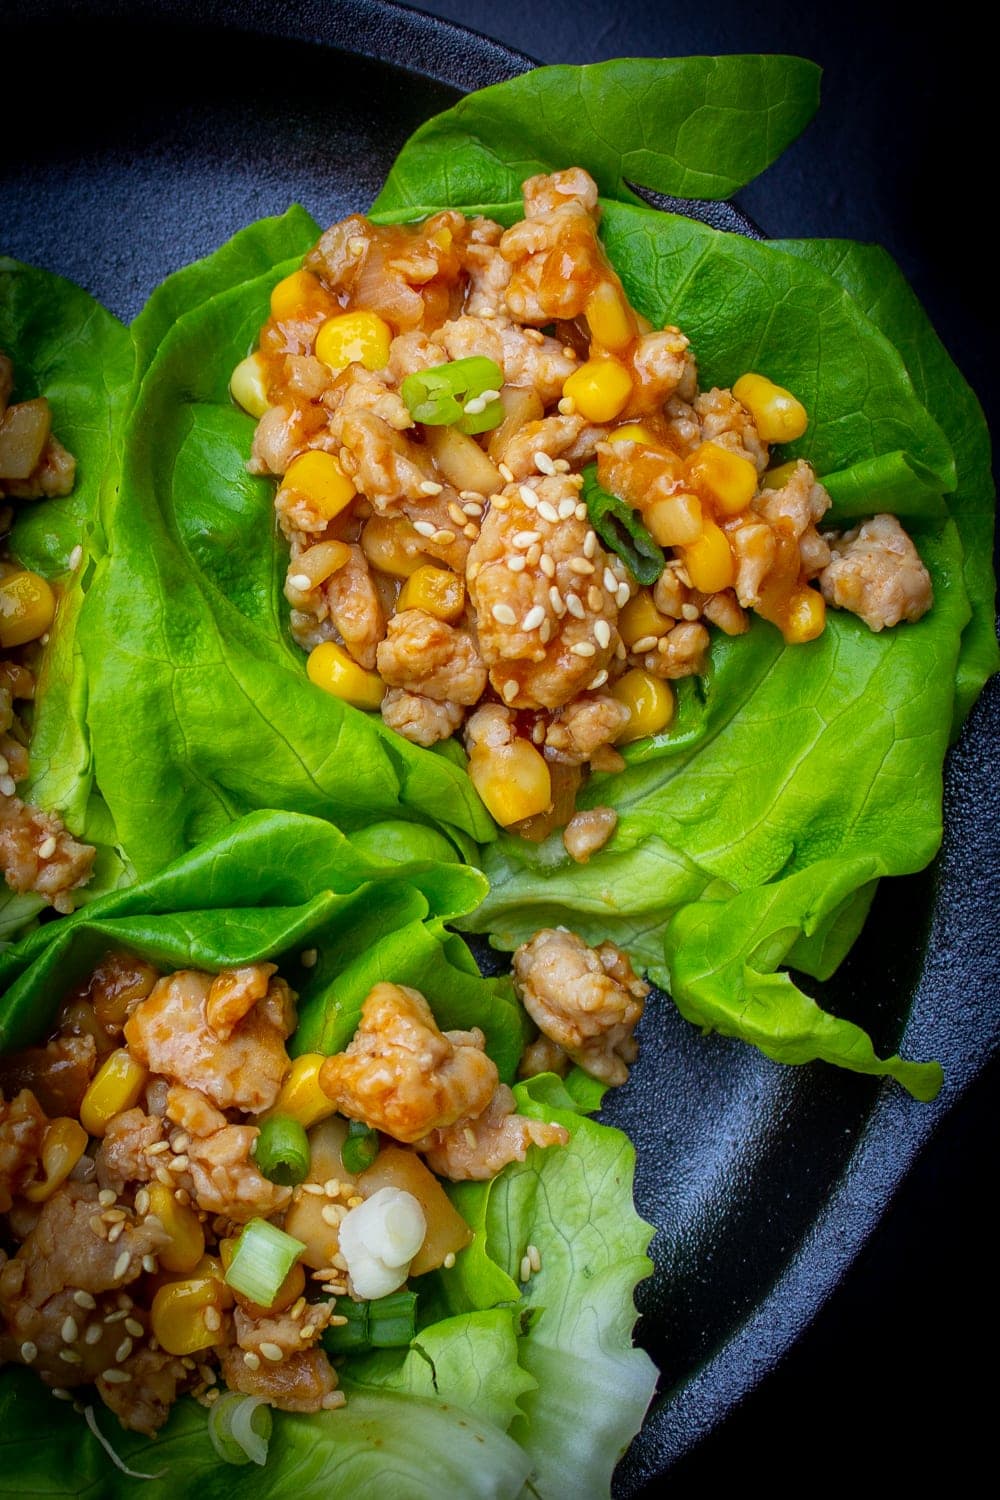 3 PF Chang's chicken lettuce wraps on plate p